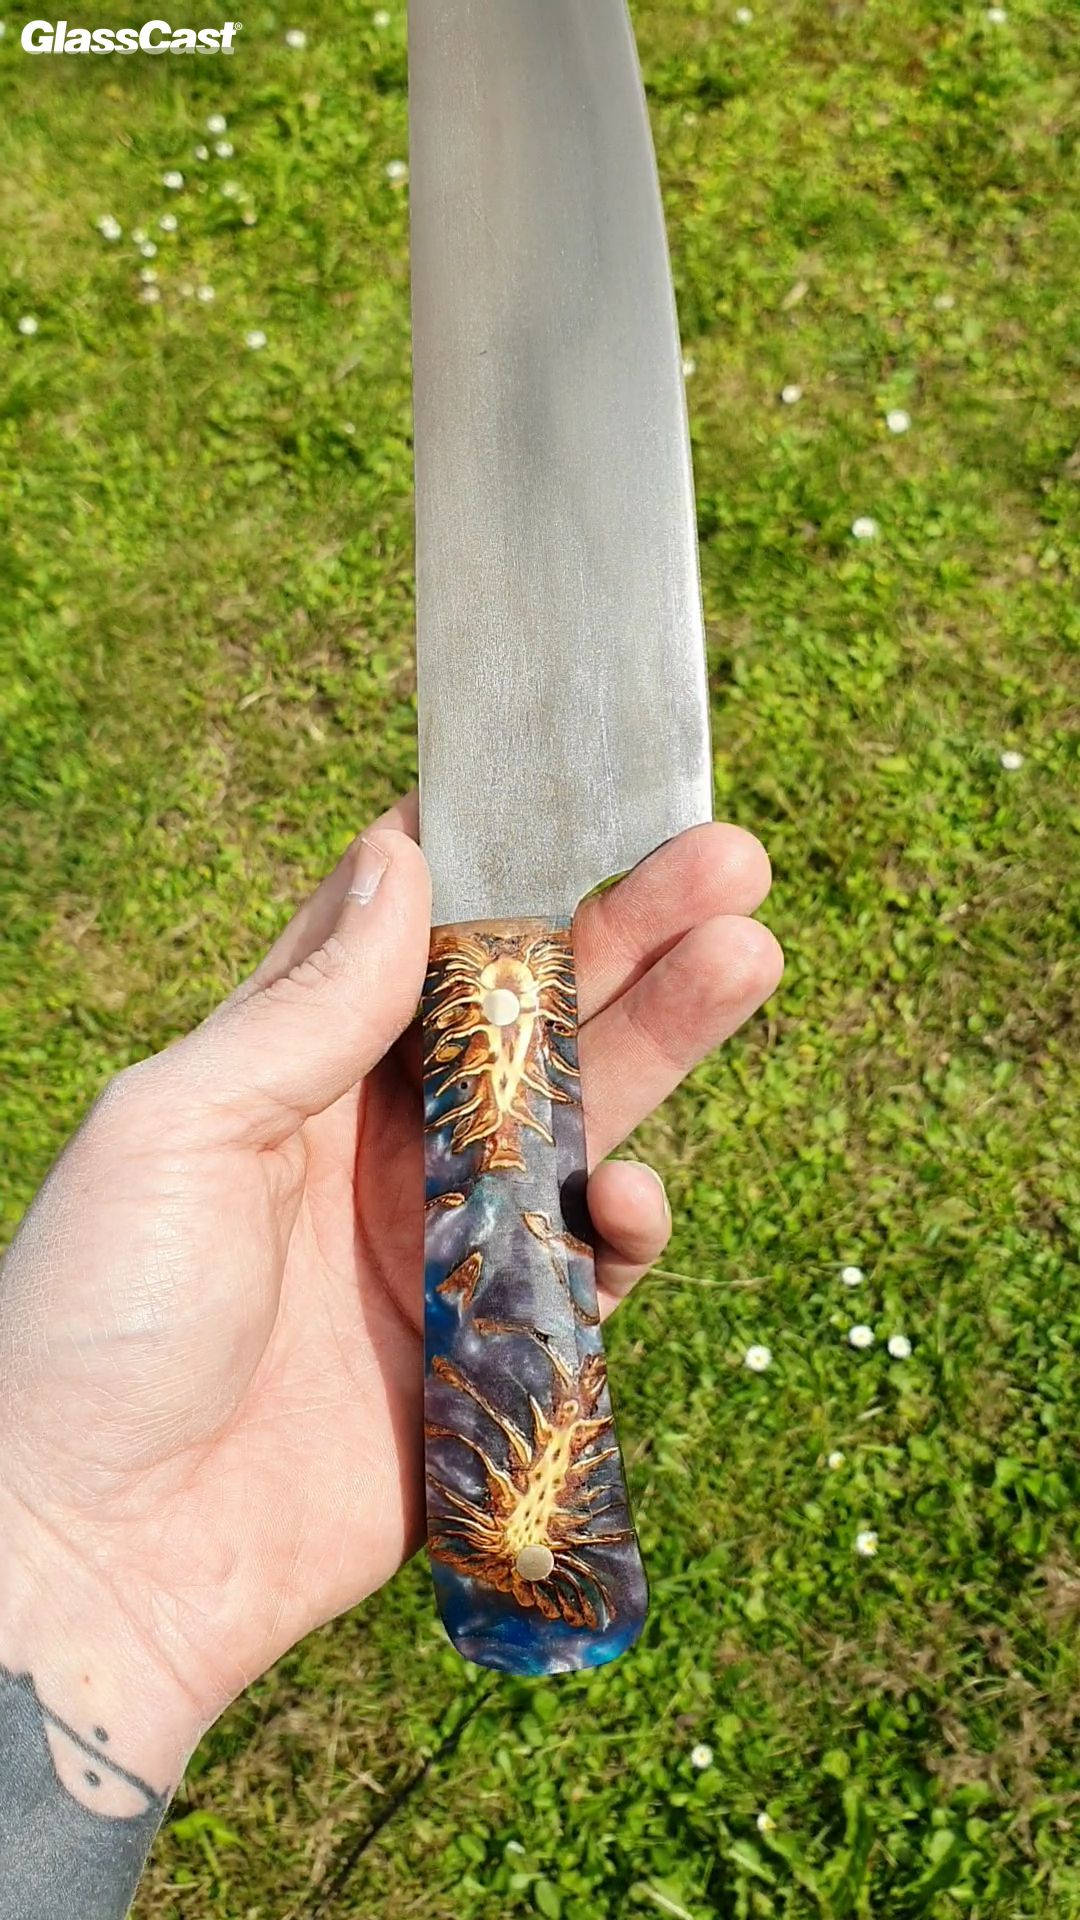 https://media.glasscastresin.com/contentimages/extralarge/Resin-and-fir-cone-knife-handle.jpg